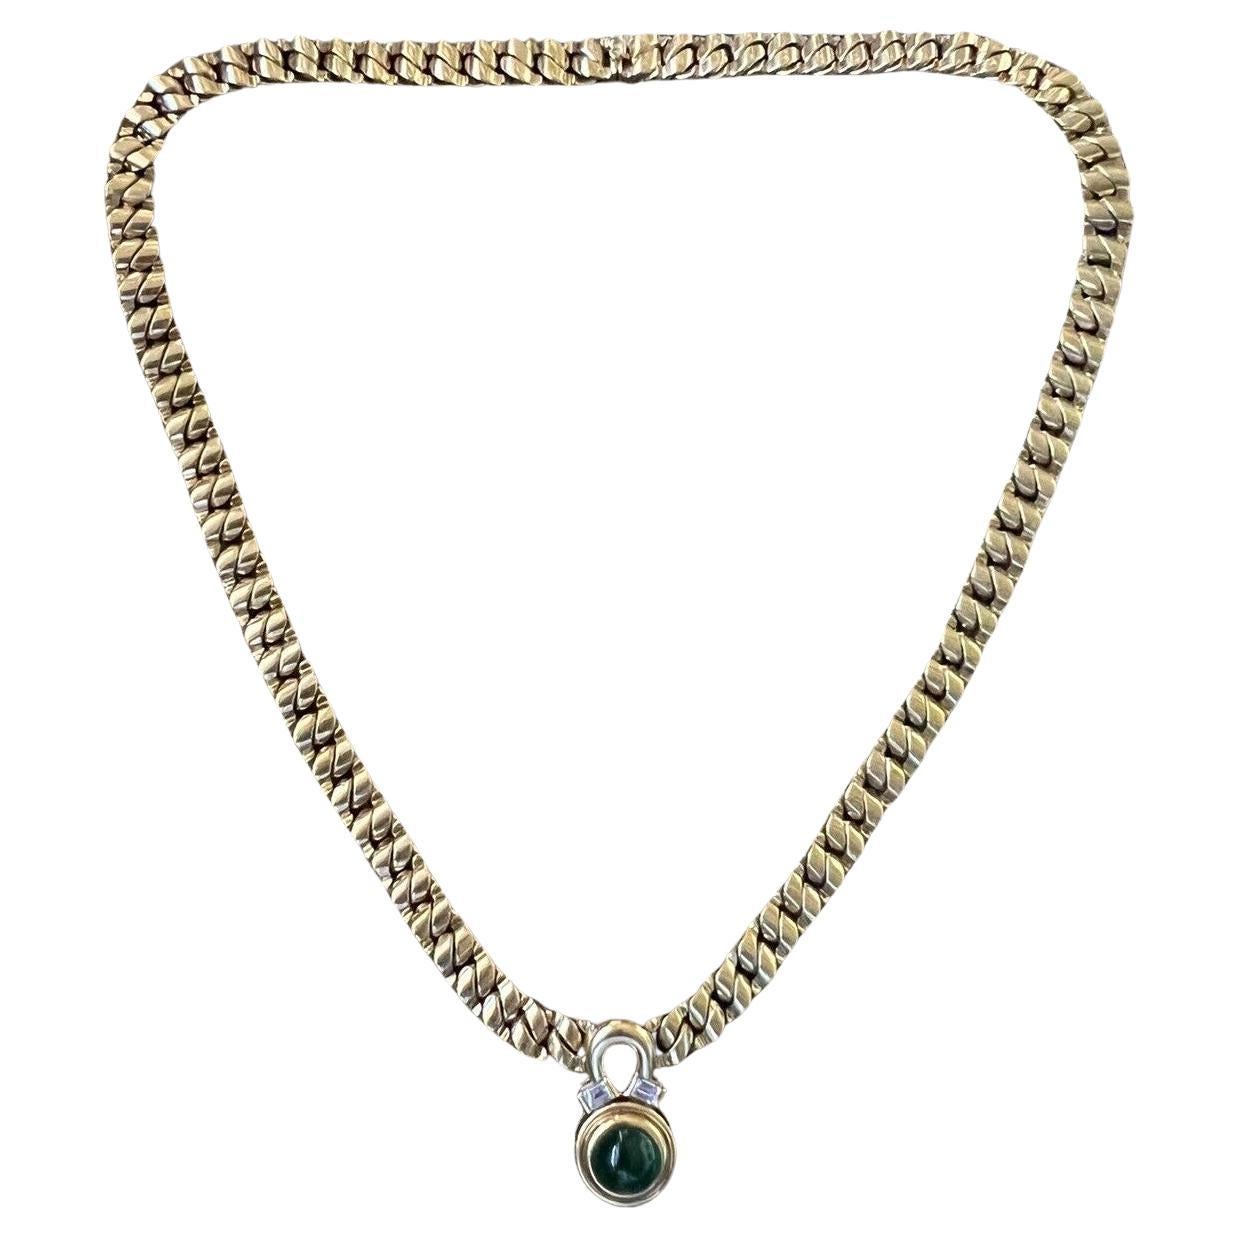 BVLGARI ITALY 18k Yellow Gold, Baguette Diamond & Cabochon Emerald Link Necklace For Sale